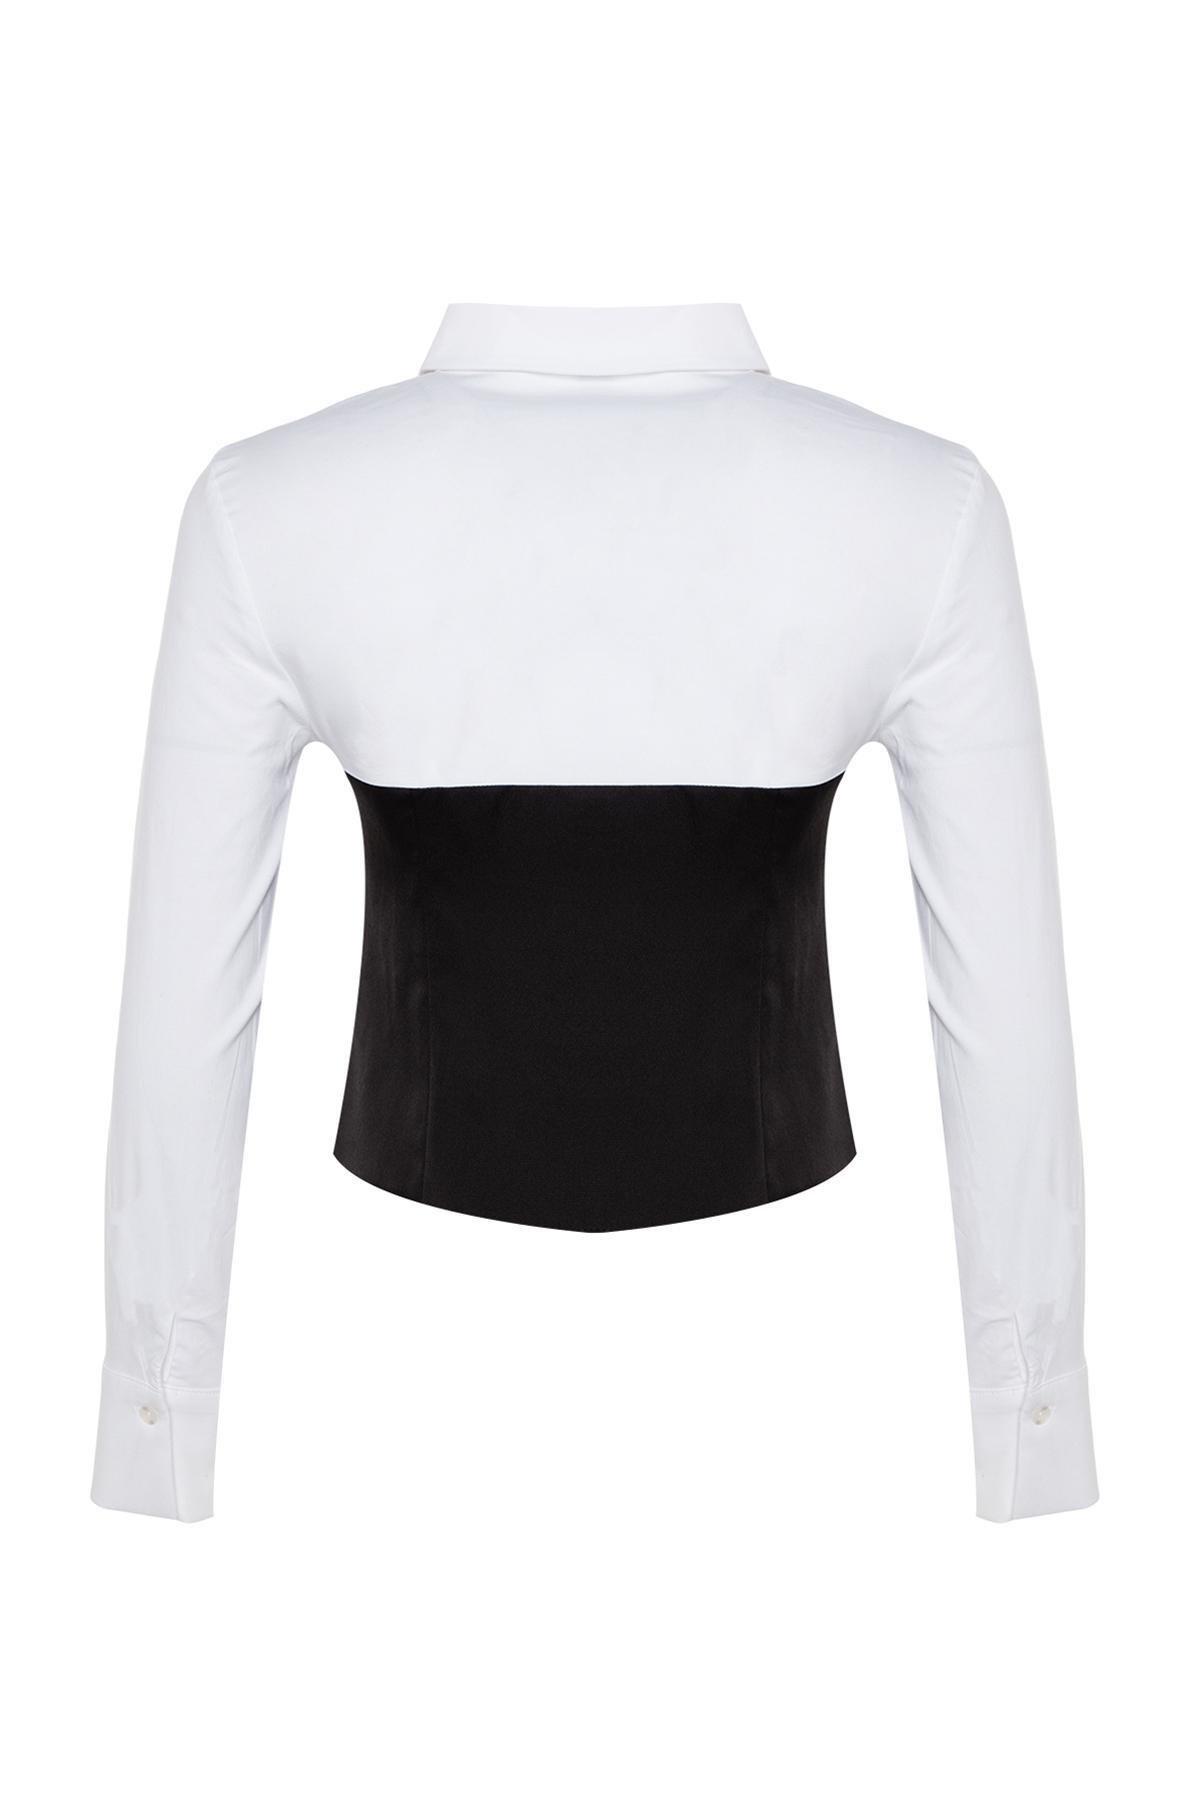 Trendyol - Black And White Fitted Shirt